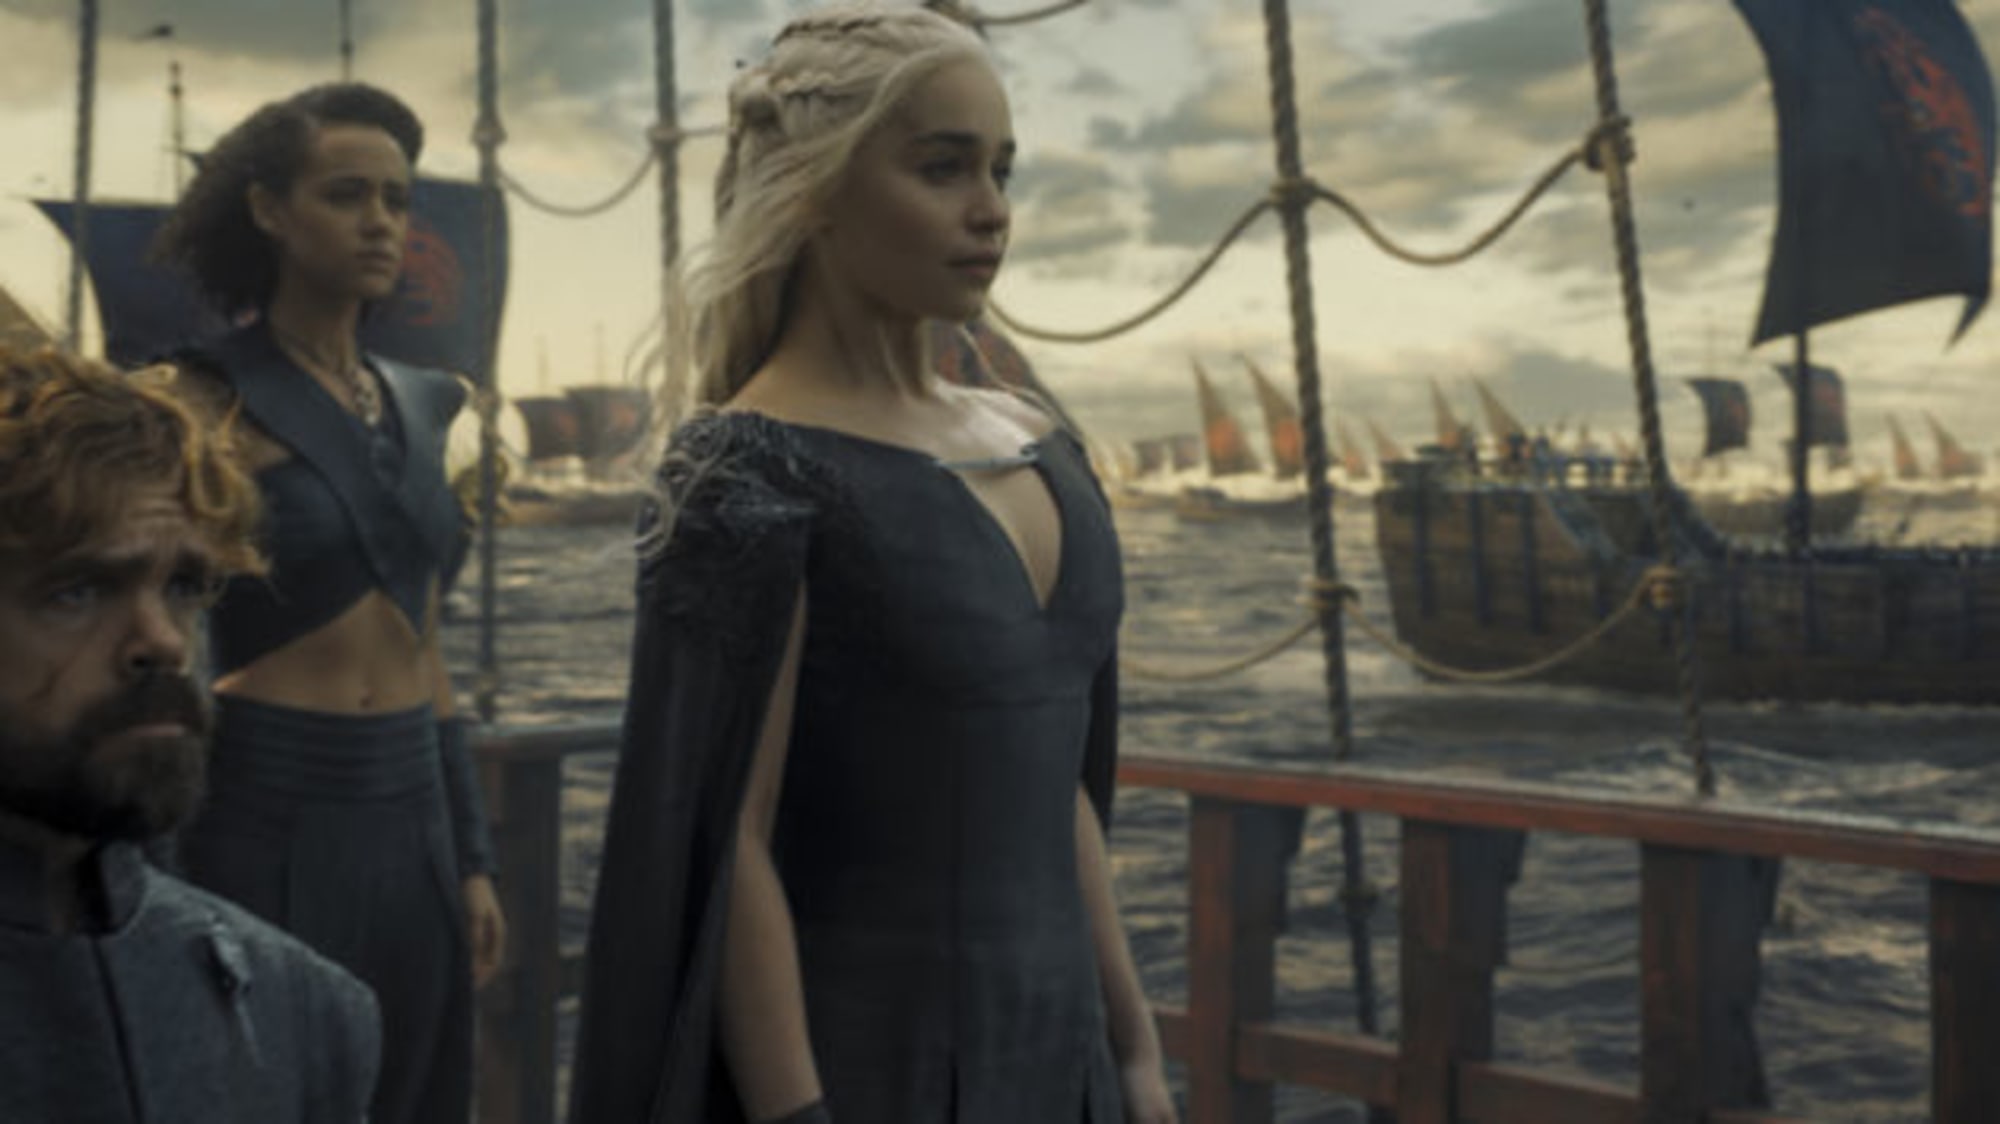 Game of Thrones: Every episode ranked from worst to best, from